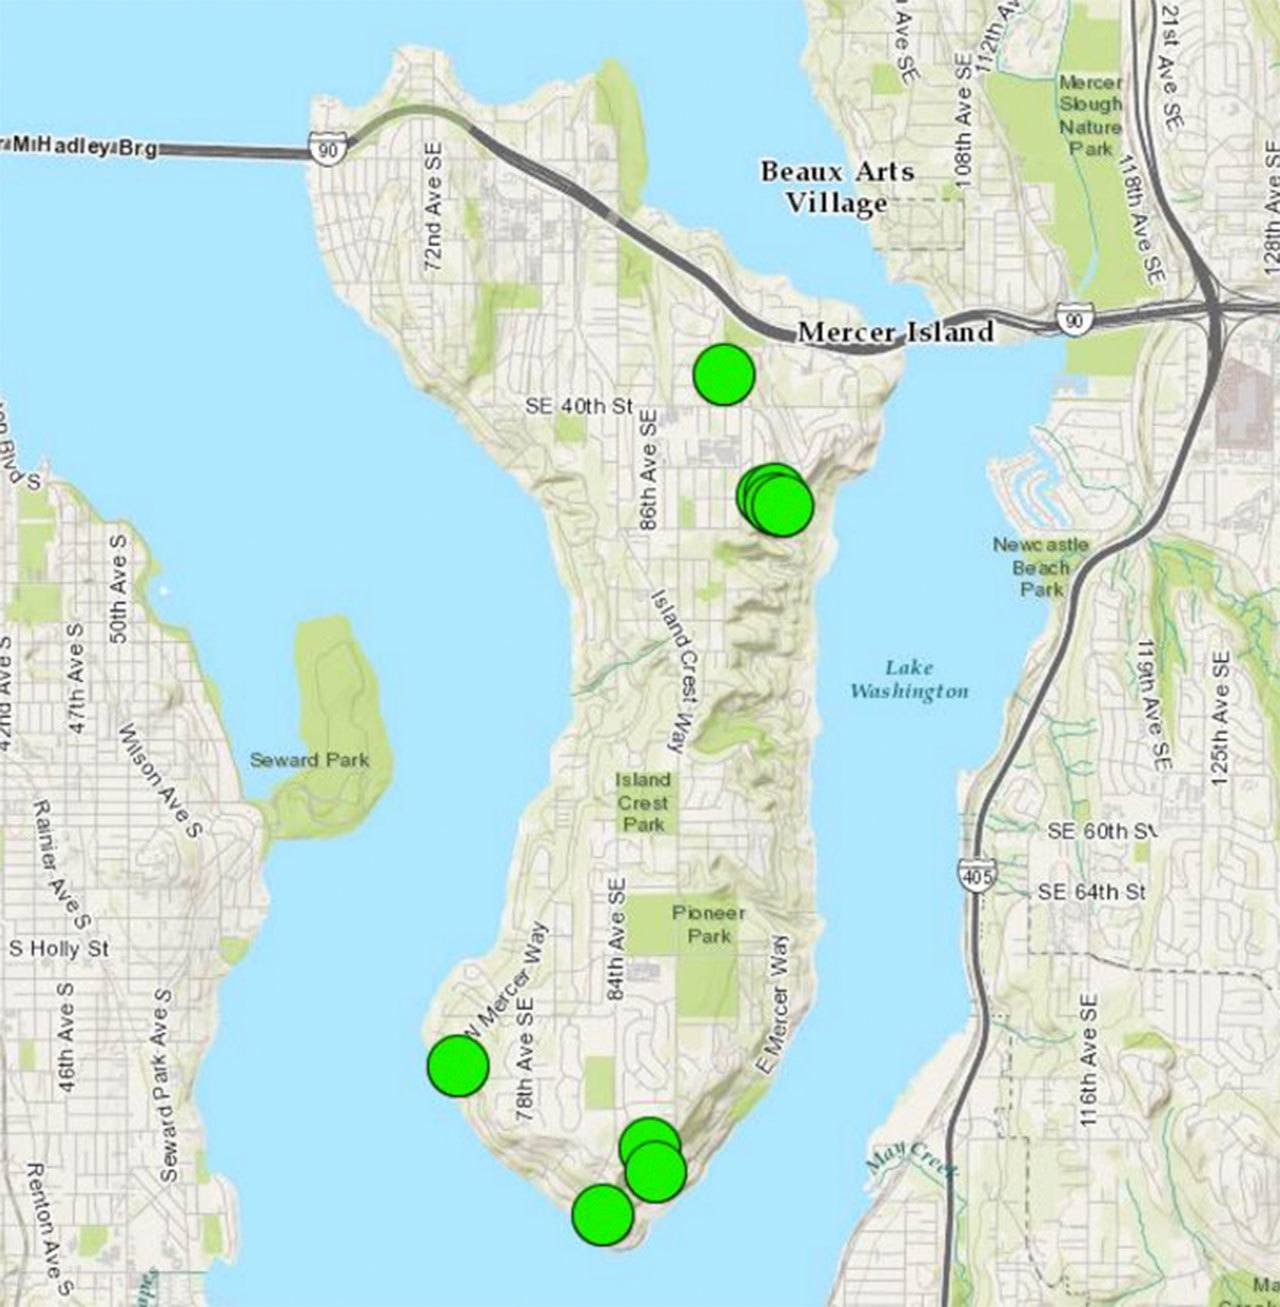 Six landslides last week in Mercer Island impacted more than 12 homes. Image courtesy of the city of Mercer Island